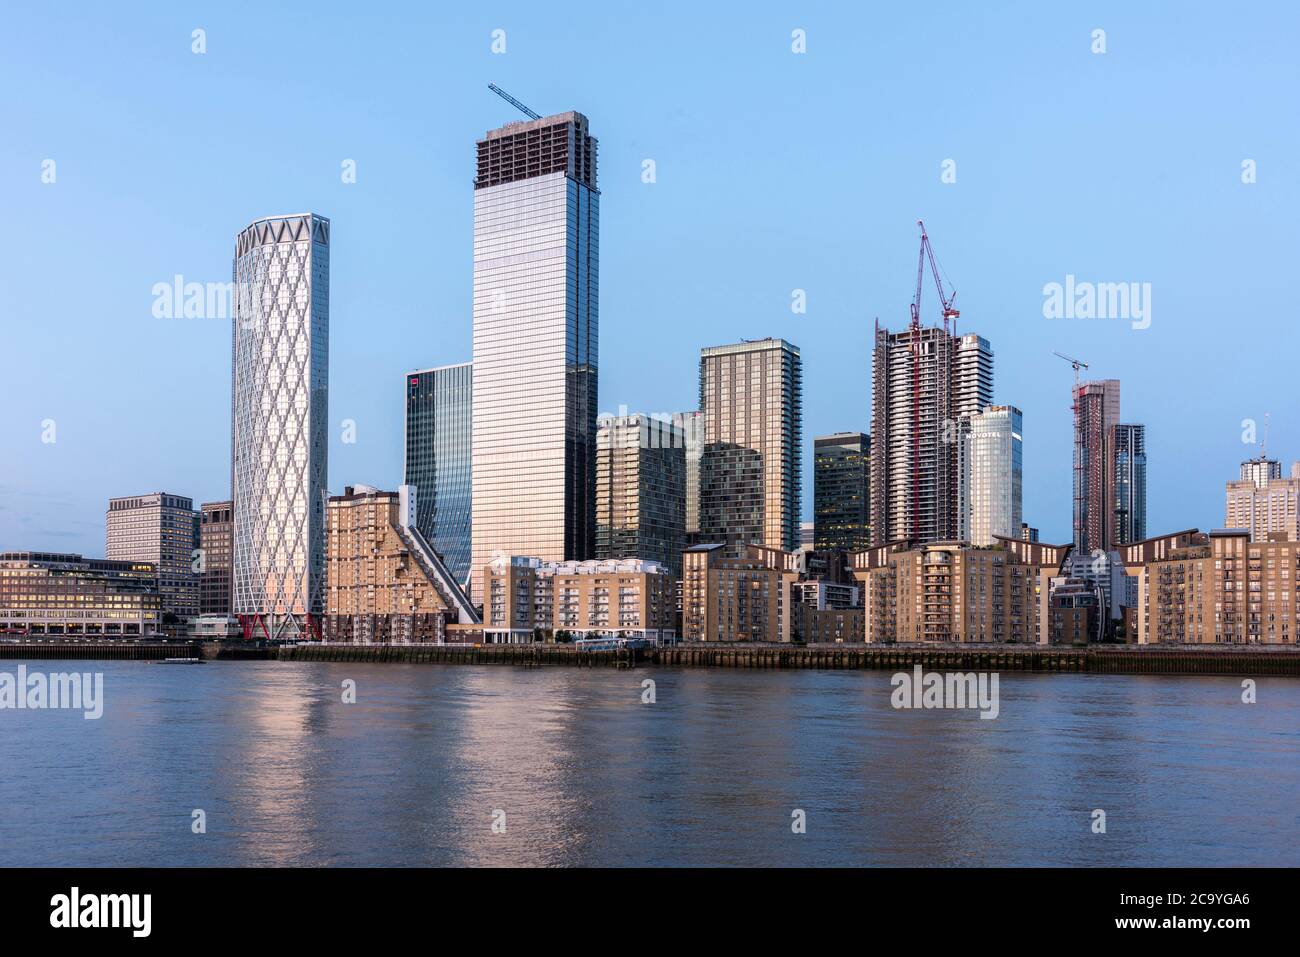 View across Thames from west at sunset. Isle of Dogs, London, United Kingdom. Architect: Various, 2020. Stock Photo